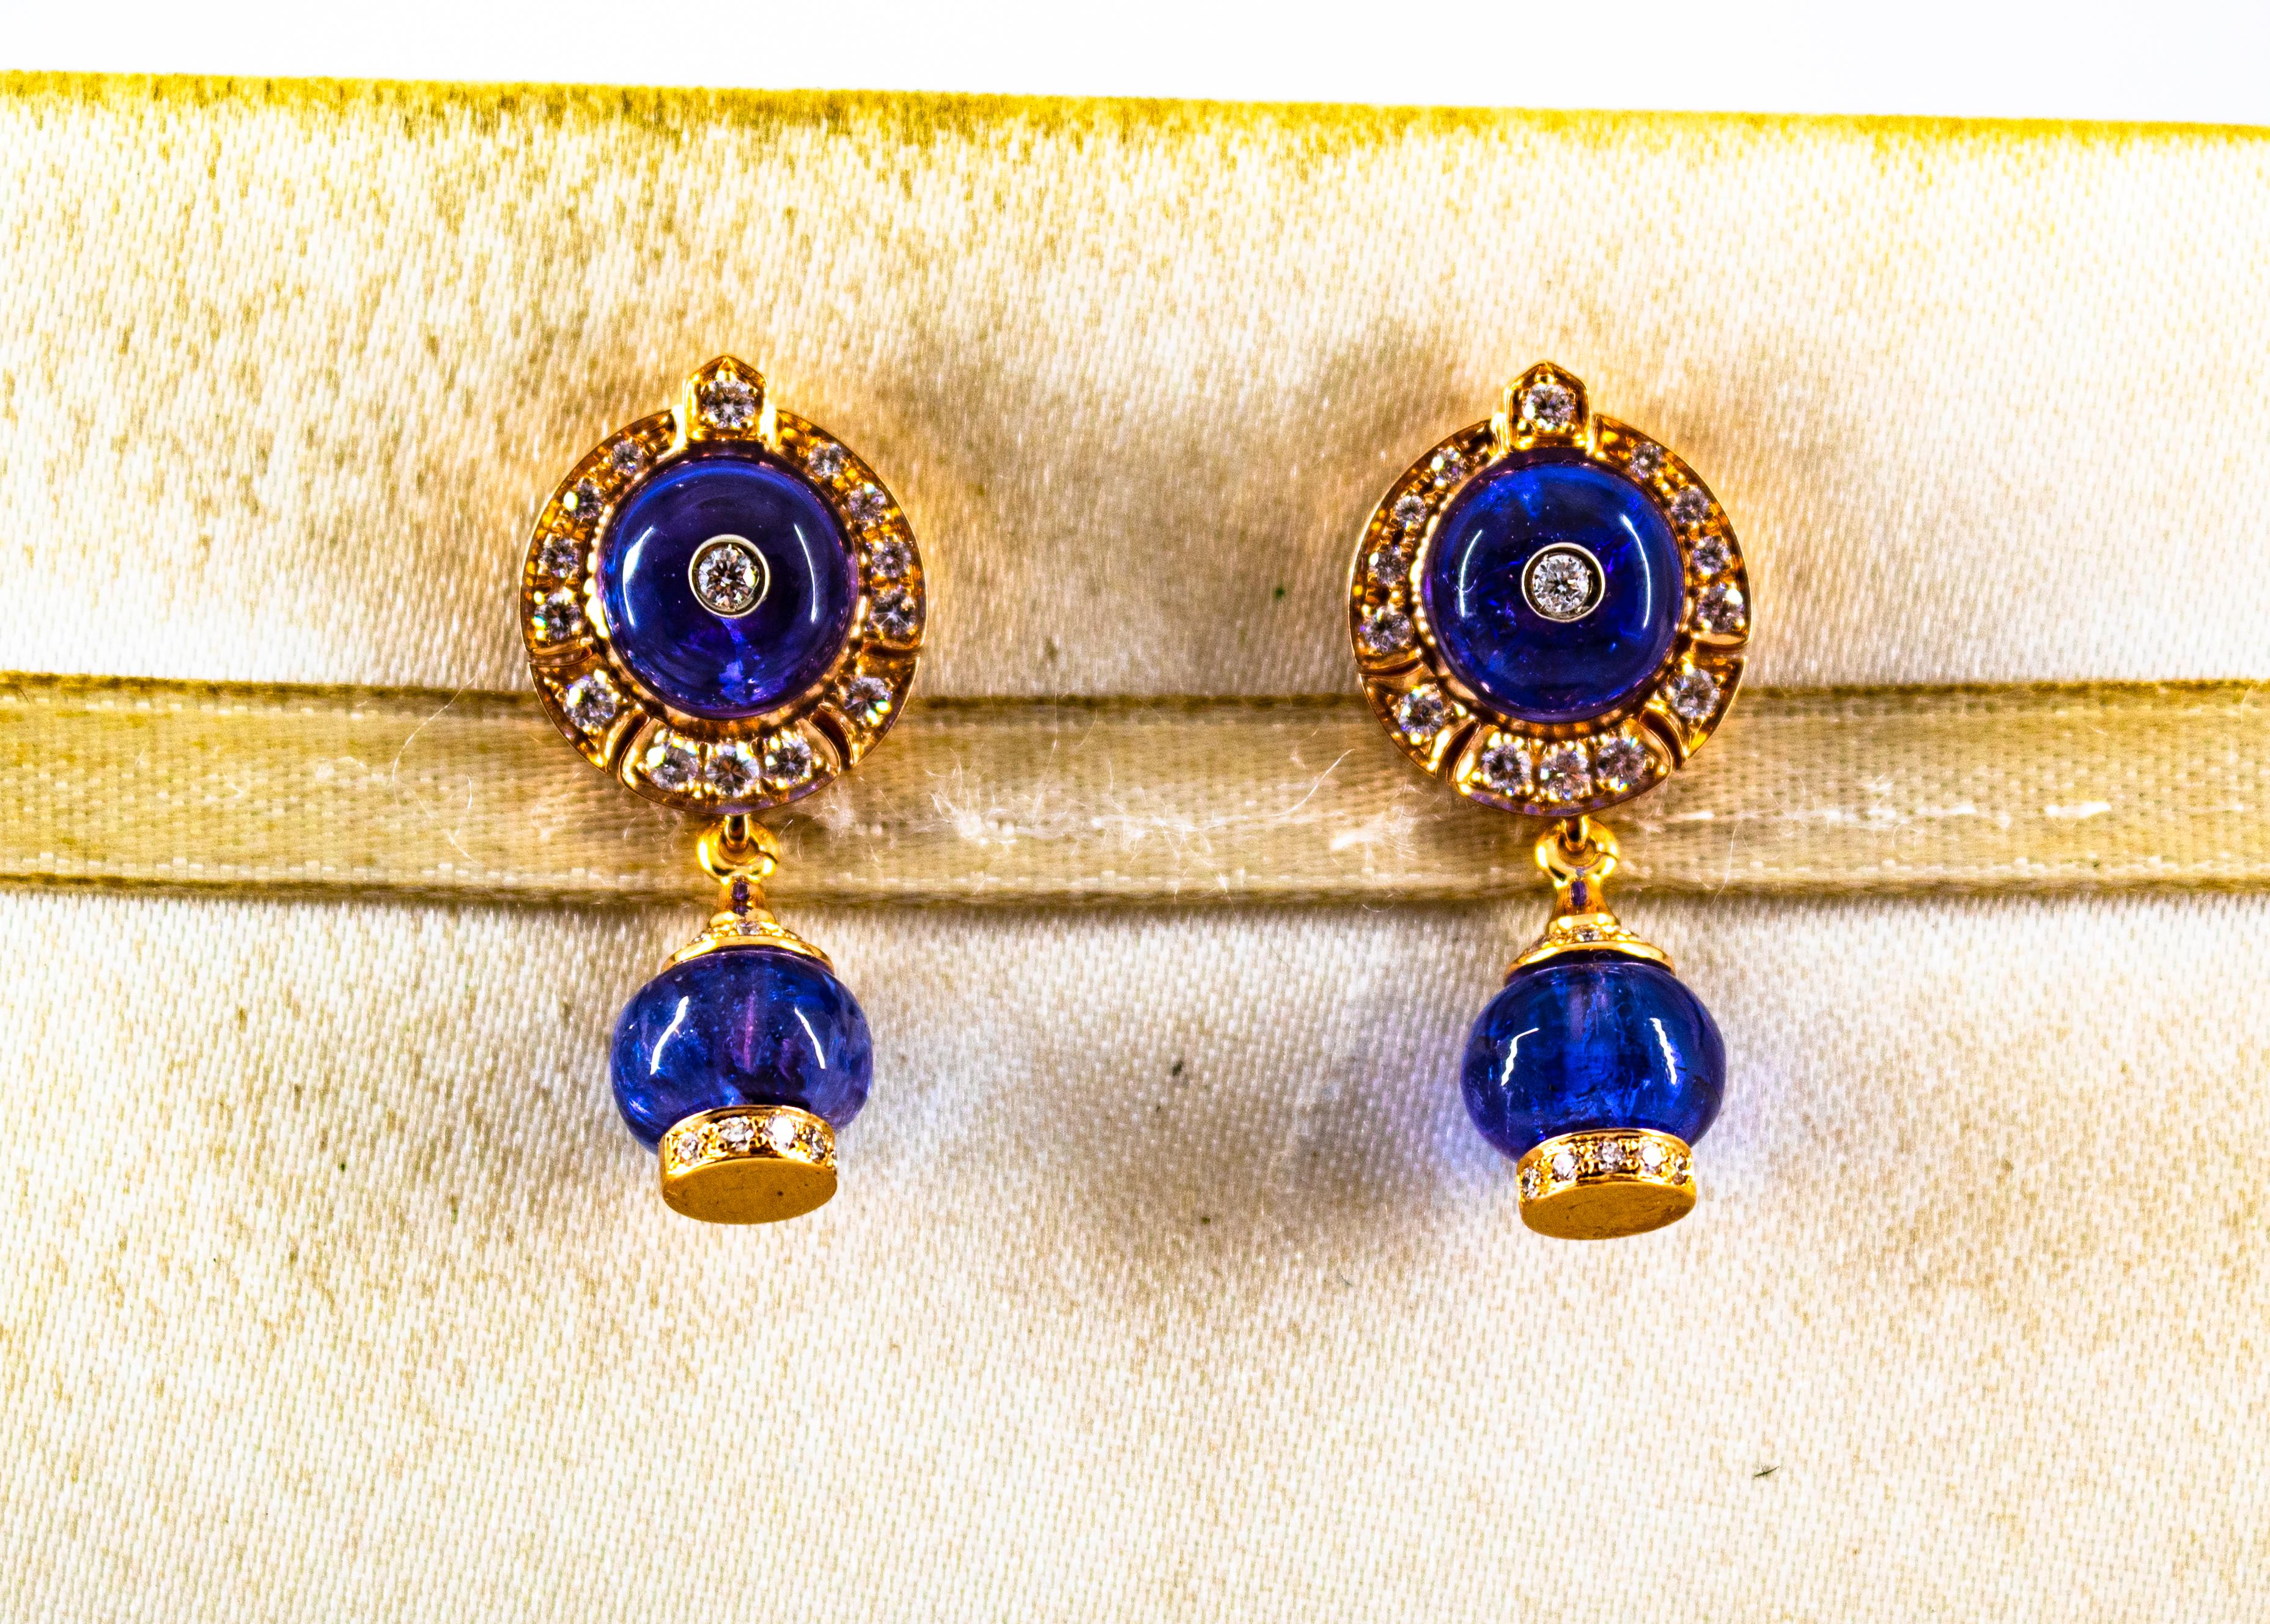 These Earrings are made of 14K Yellow Gold.
These Earrings have 0.45 Carats of White Brilliant Cut Diamonds.
These Earrings have 14.00 Carats of Natural Tanzanite.

These Earrings are available also with Opals or in White Gold.

All our Earrings